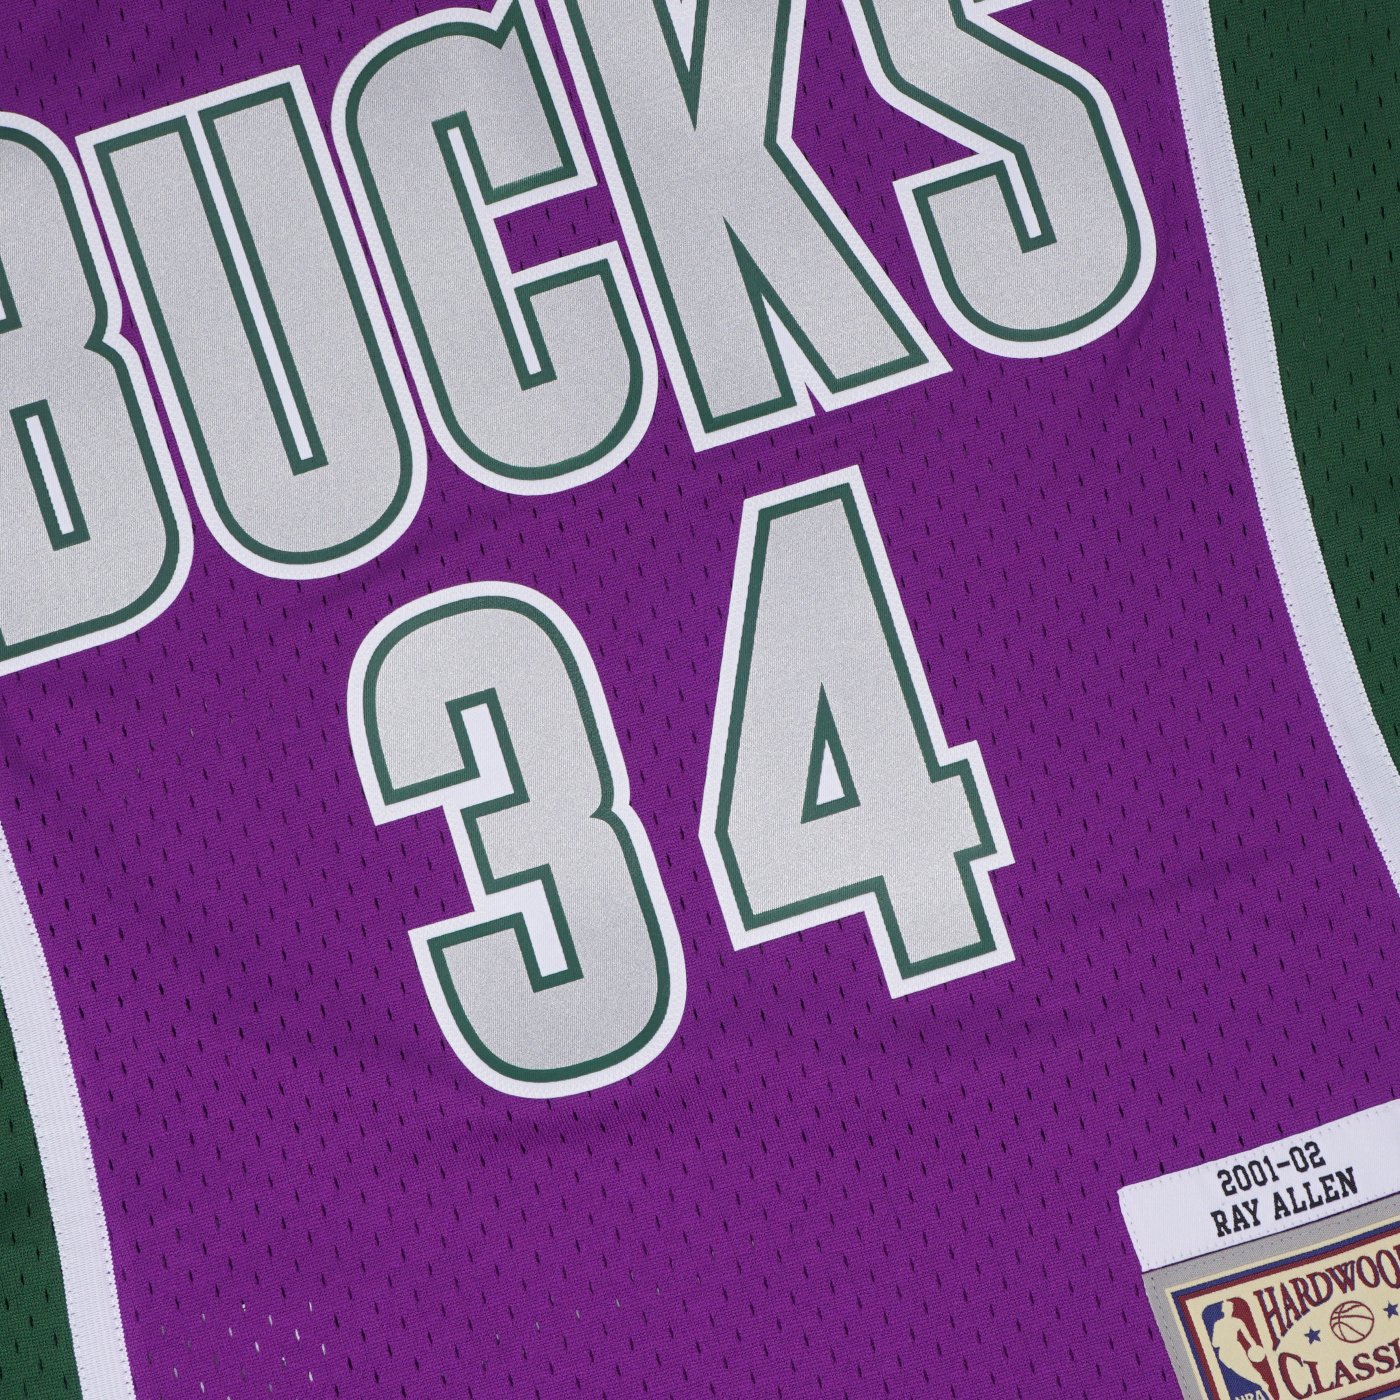 Mitchell & Ness: Bucks Ray Allen Space Knit Jersey – On Time